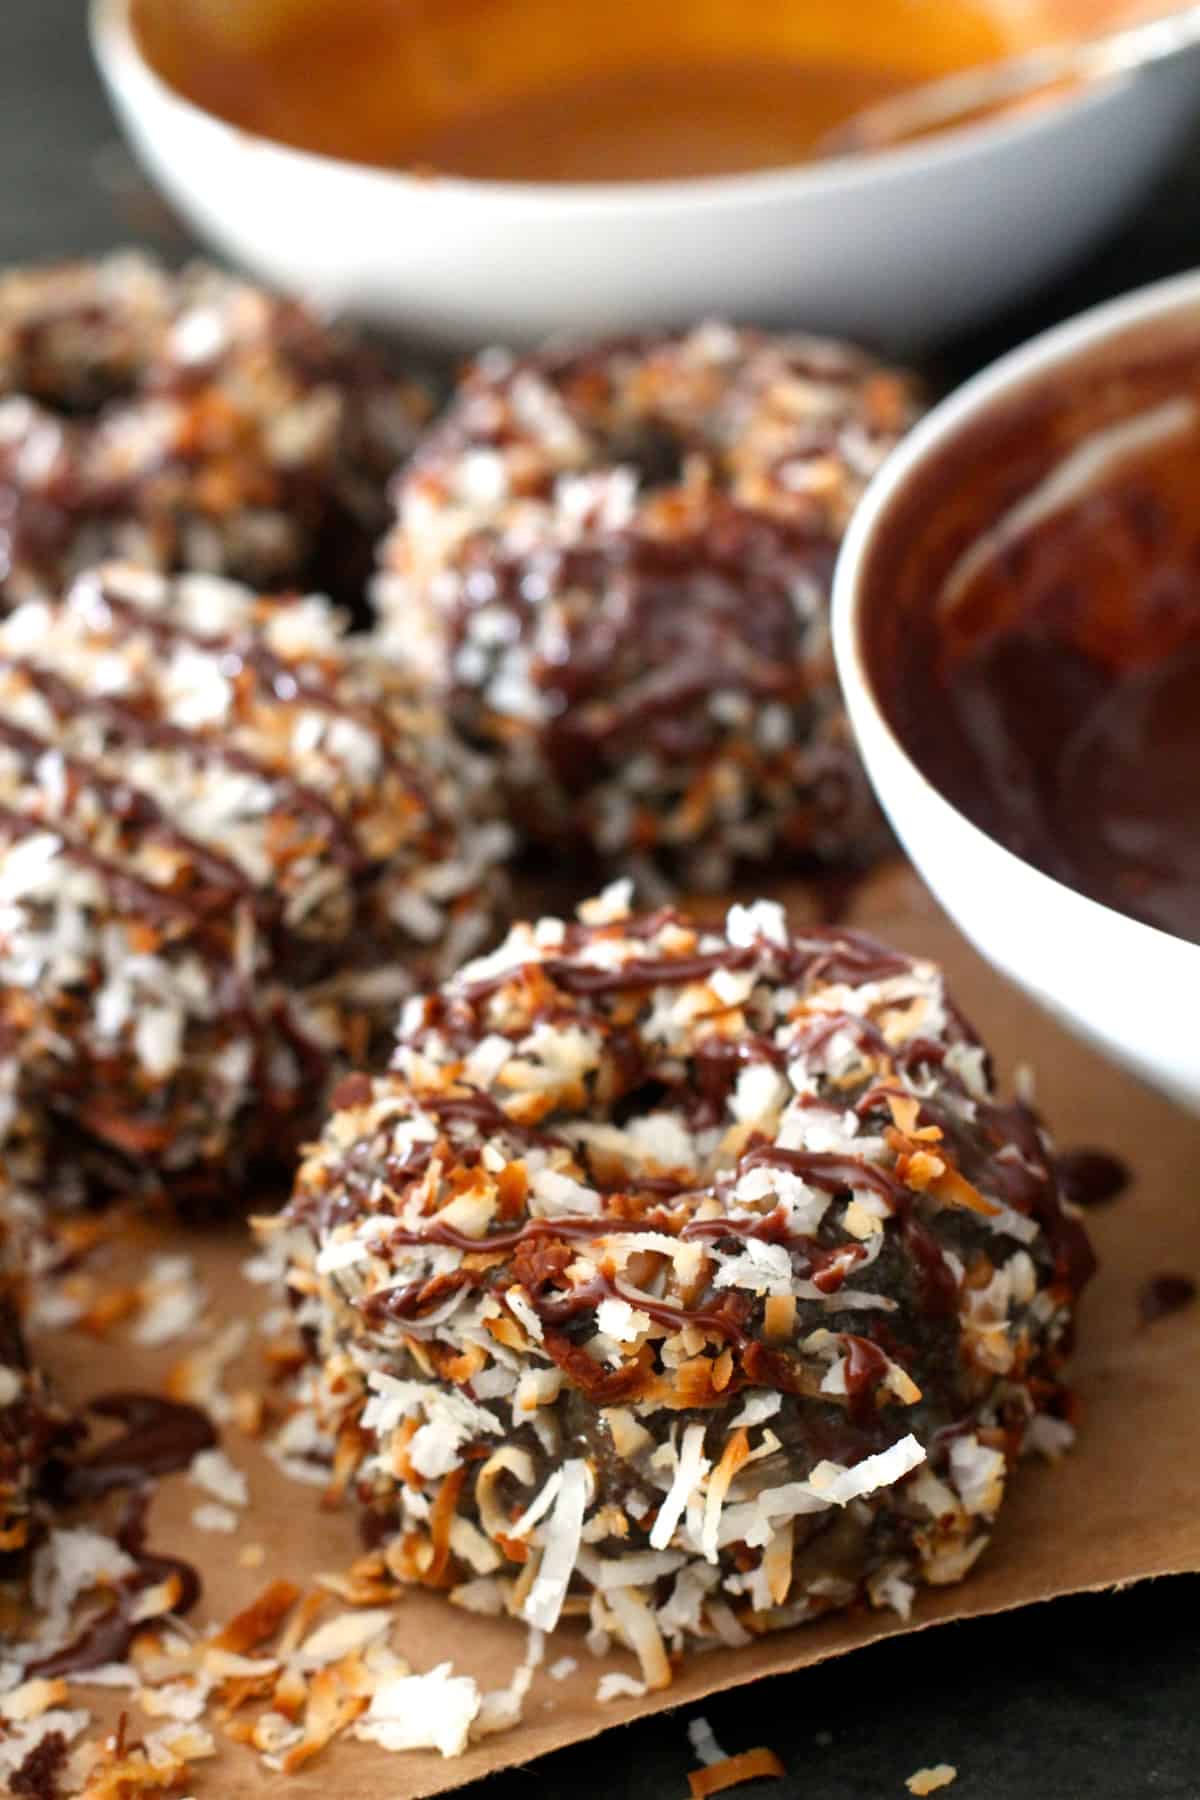  closeup of samoa cake covered in chocolate, caramel, and coconut flakes